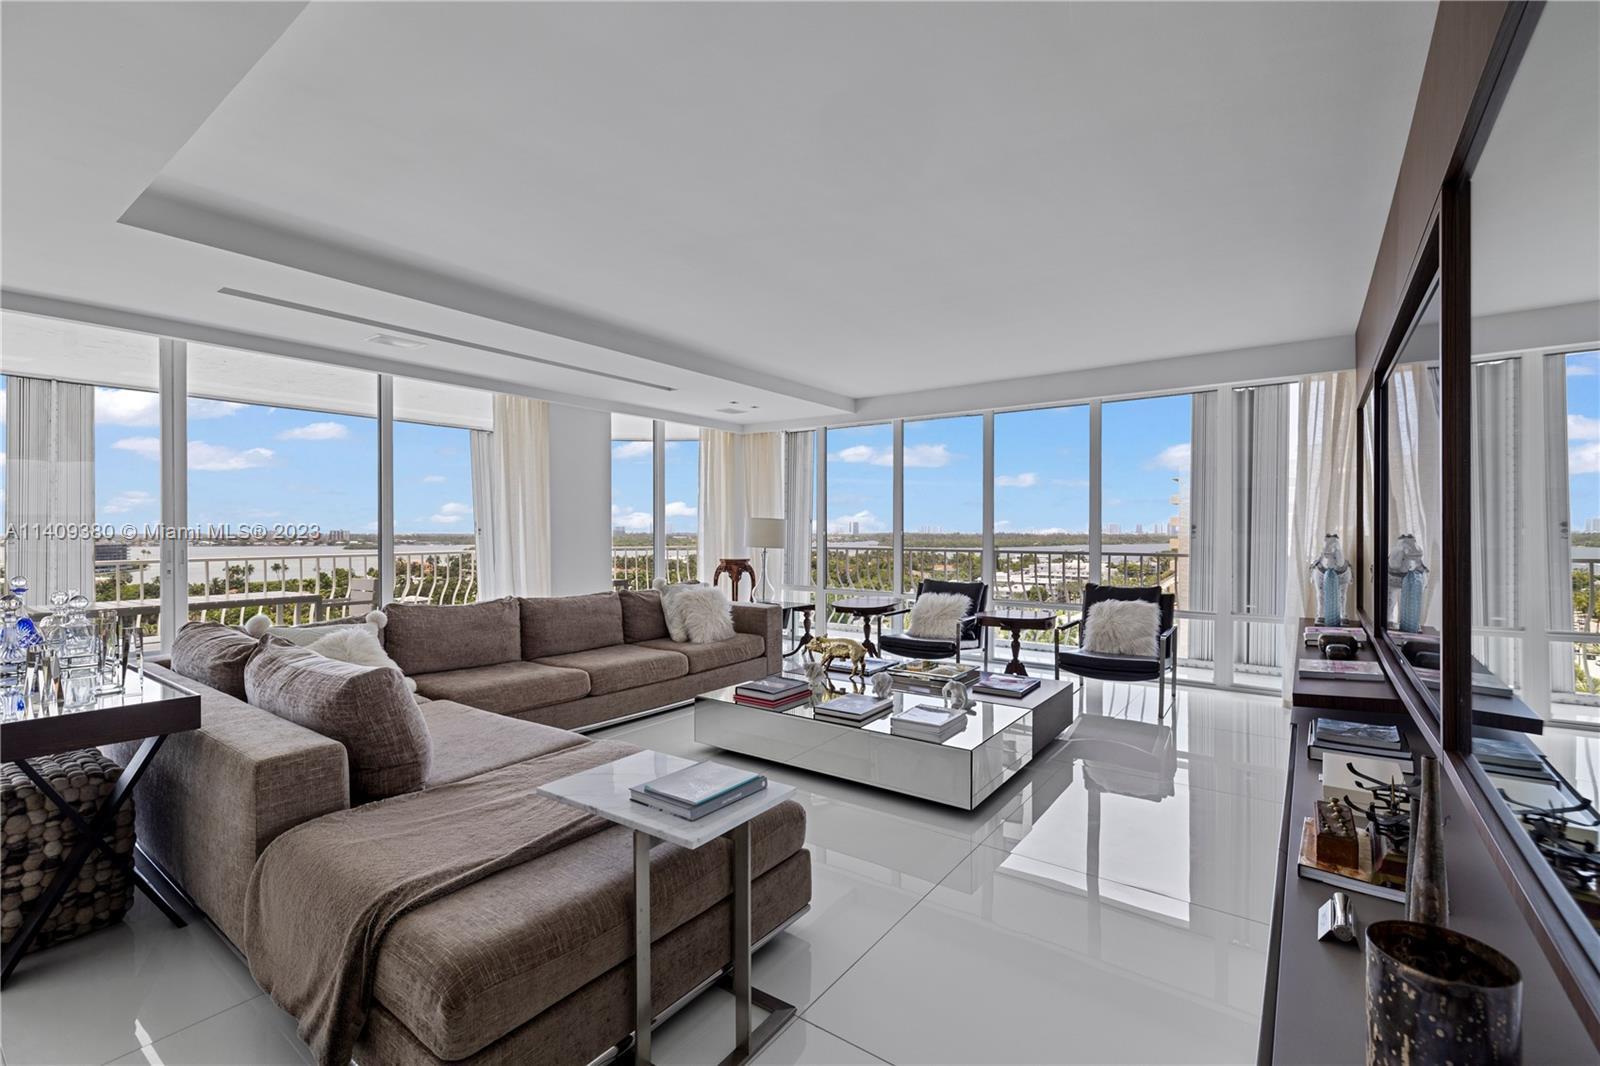 This fully renovated Bal Harbour apartment offers a spacious living space of 3,300 square feet. With